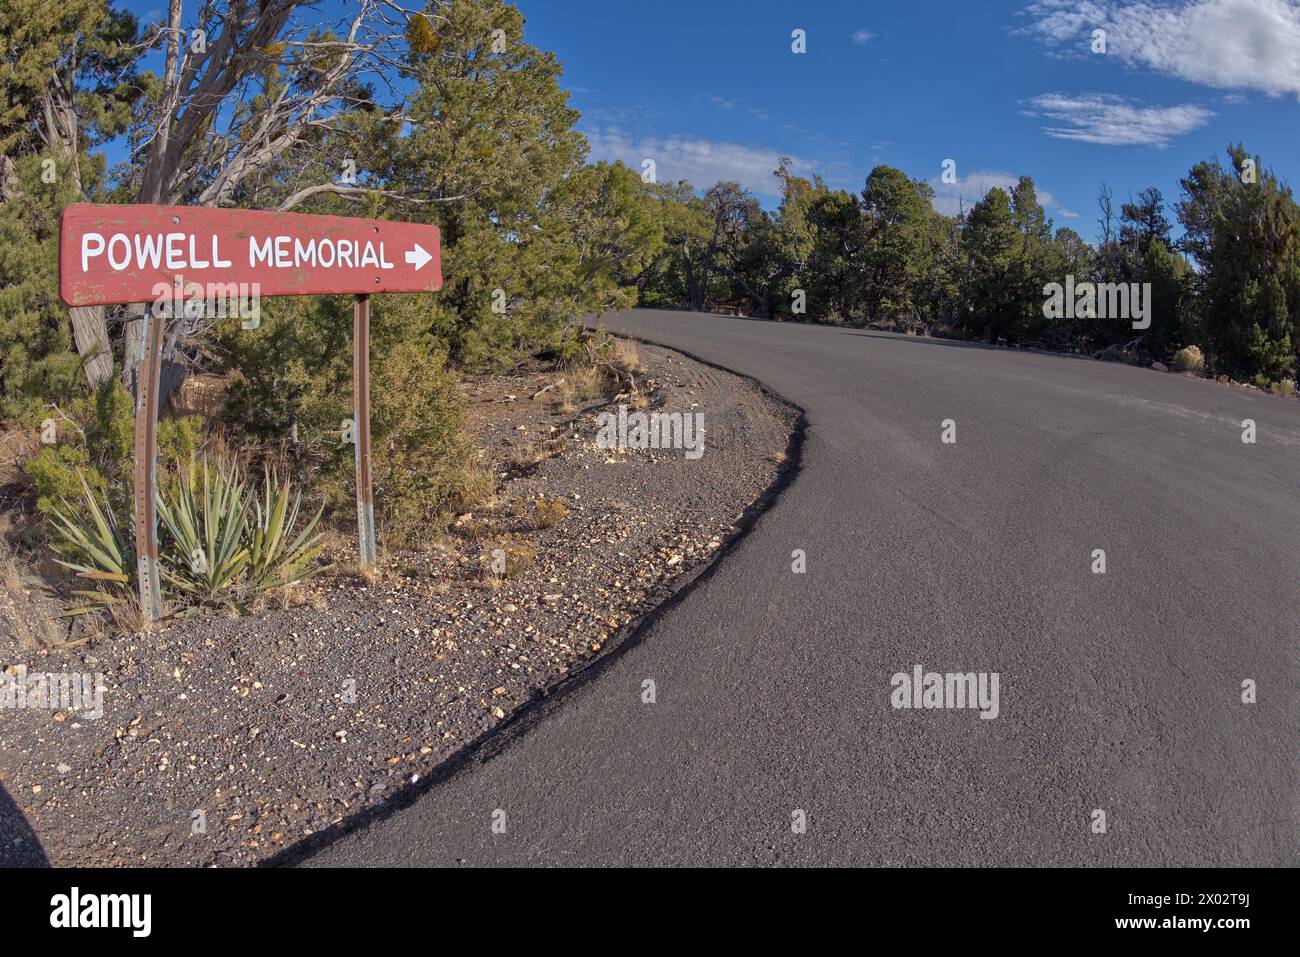 The sign marking the entry pathway to the Powell Memorial from the parking lot off Hermit Road, Grand Canyon, Arizona, United States of America Stock Photo